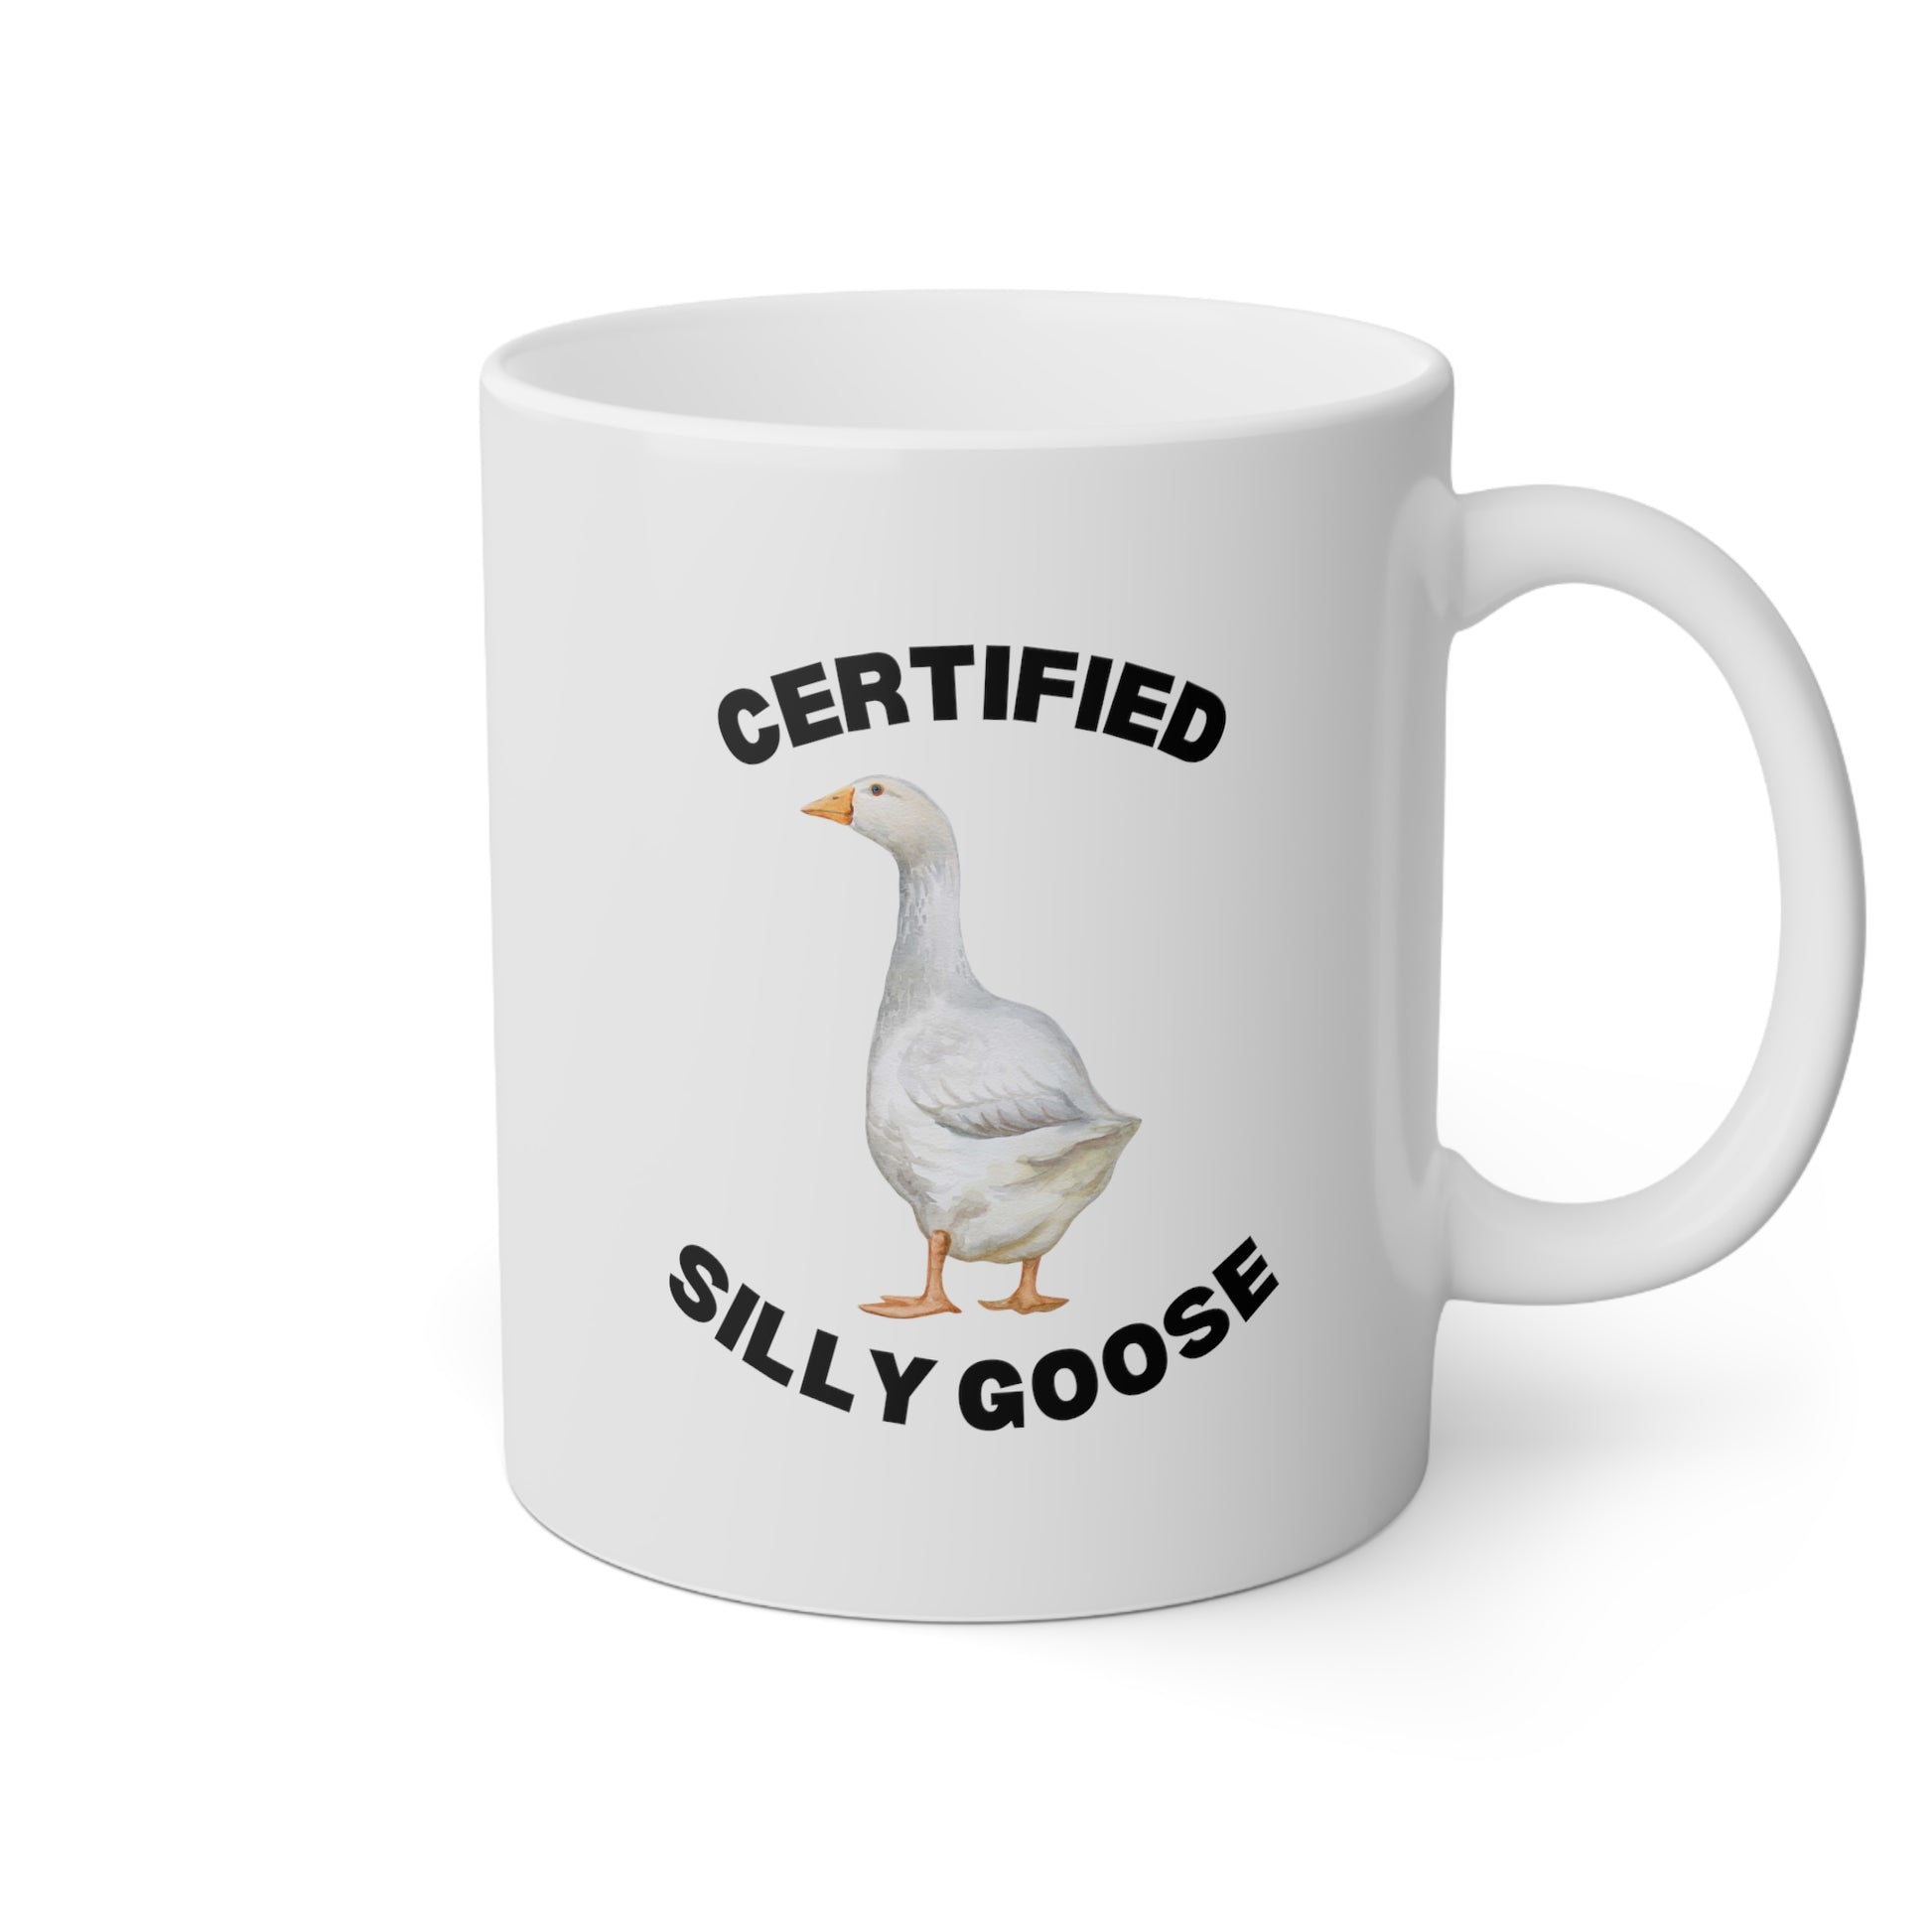 Certified Silly Goose 11oz white funny large coffee mug gift for best friend sibling meme novelty geese lover waveywares wavey wares wavywares wavy wares